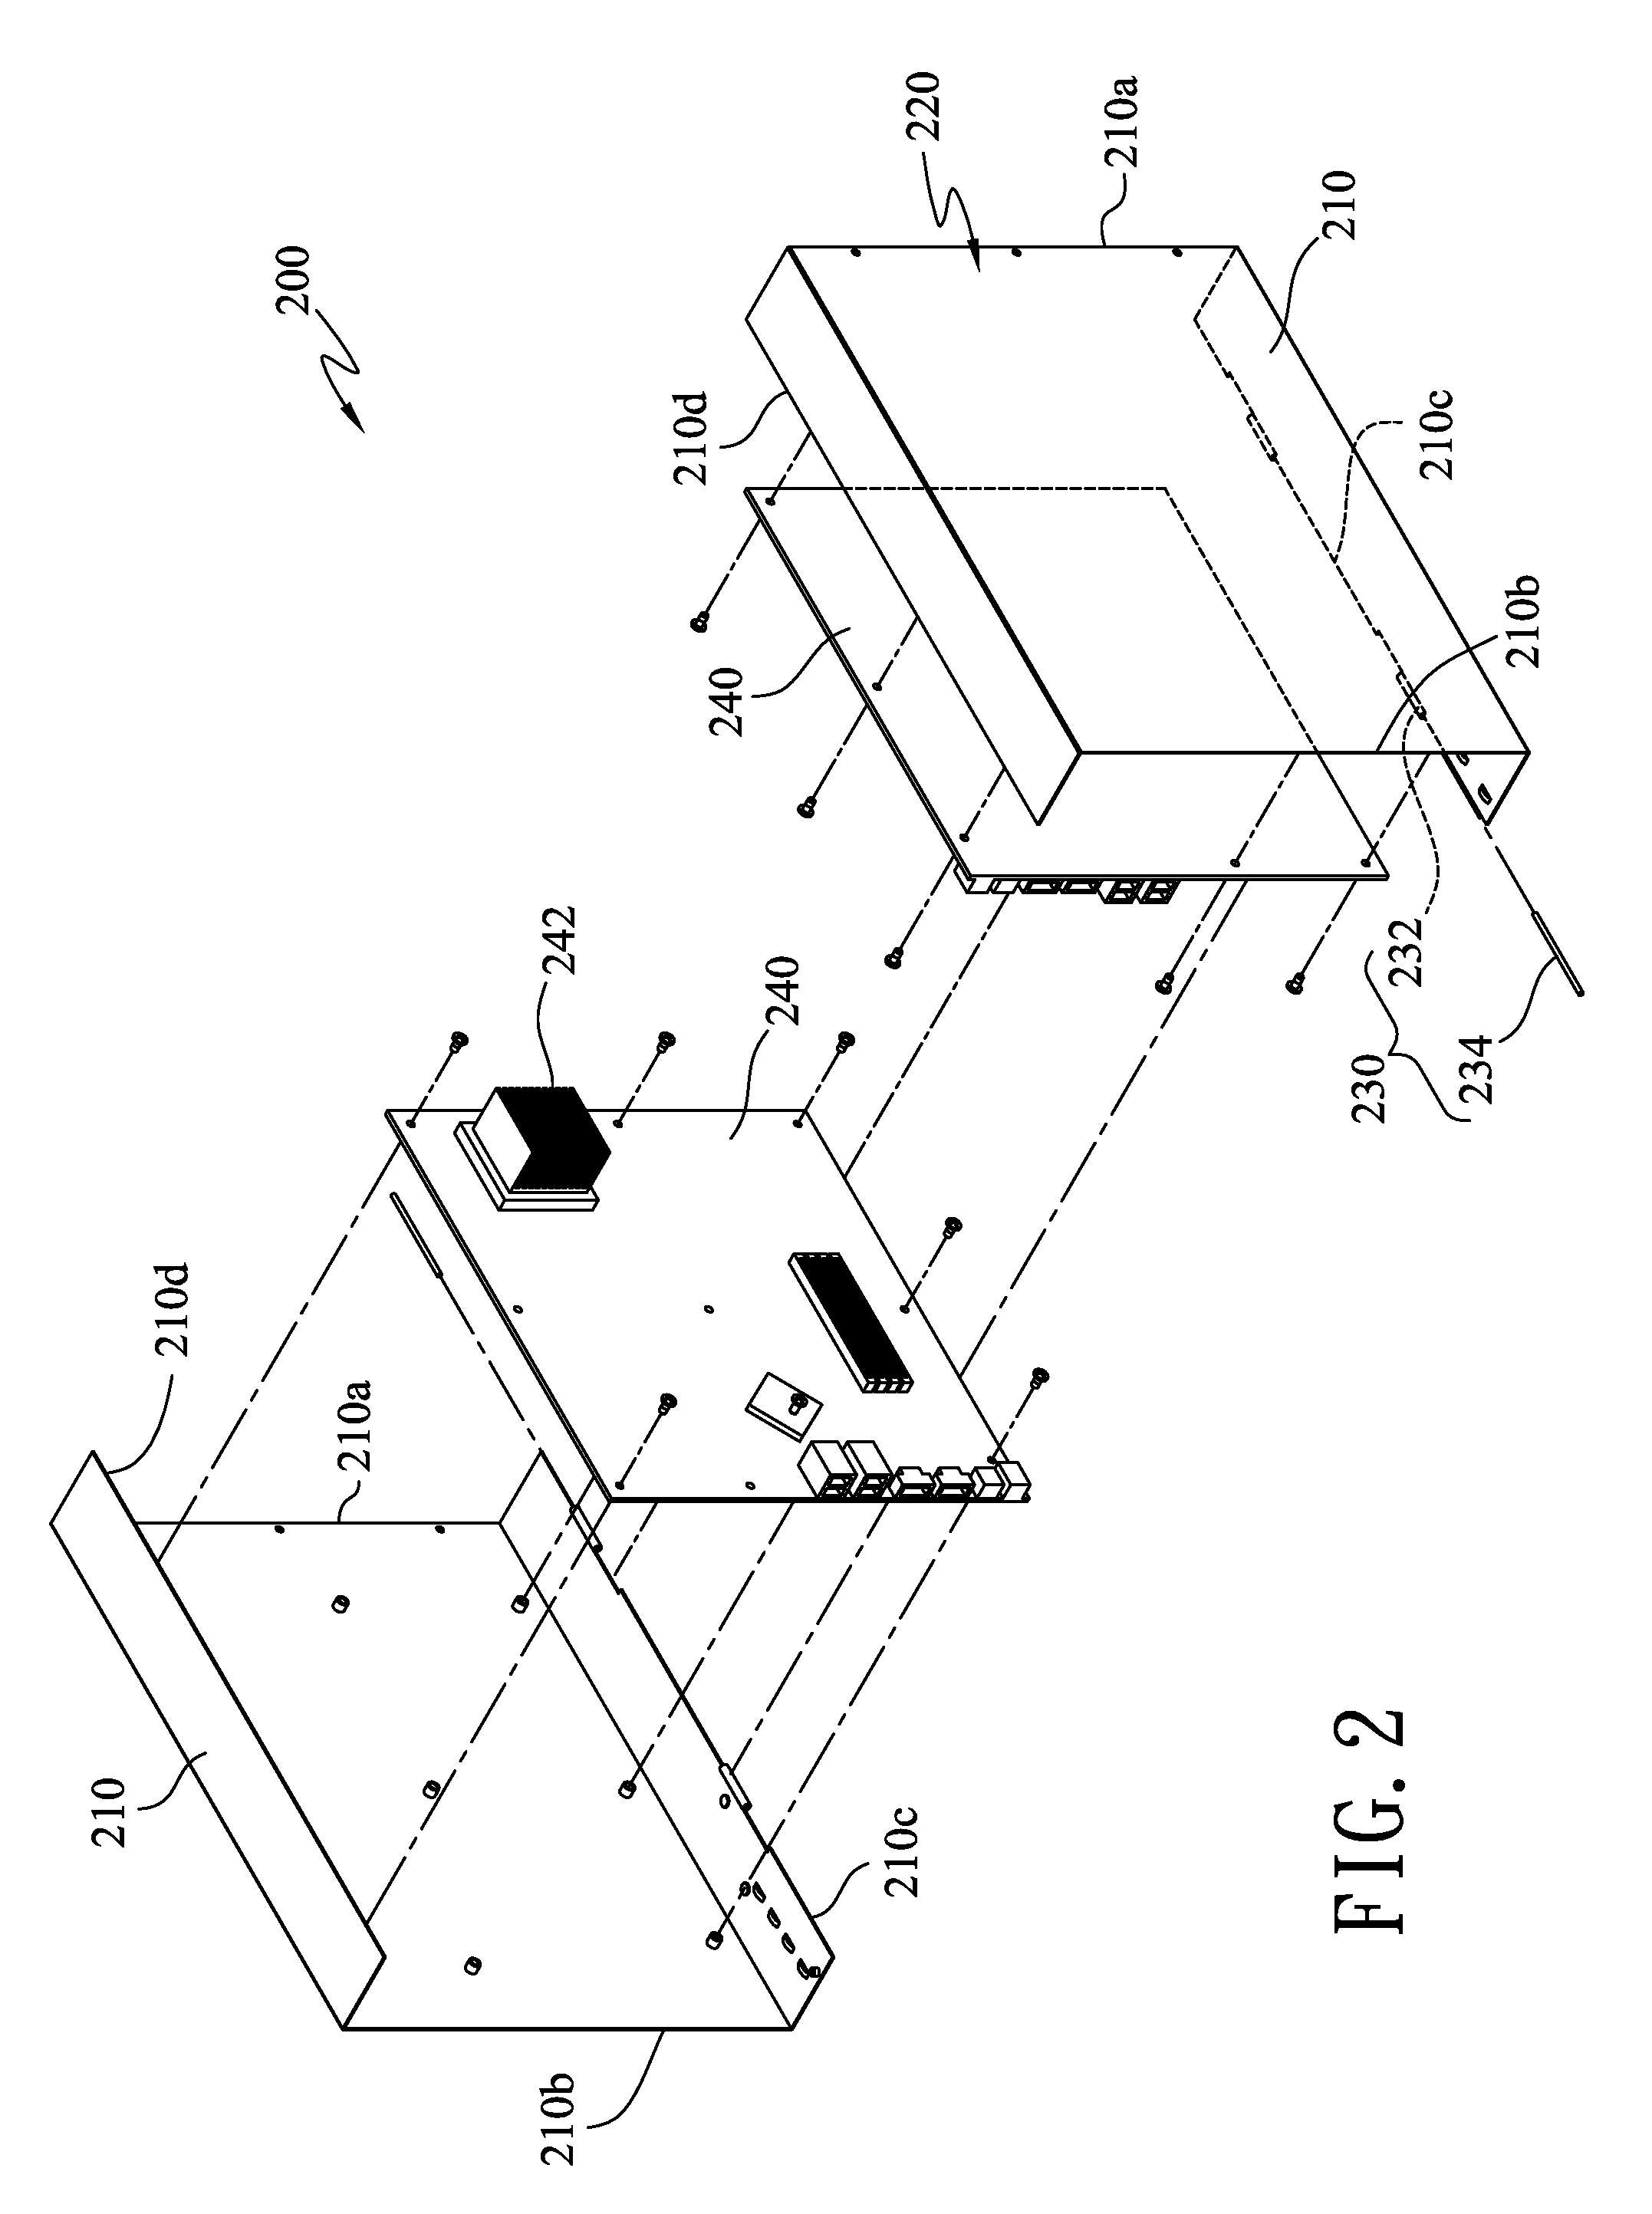 Openable Dual-Board Case for Multi-Mainboard System